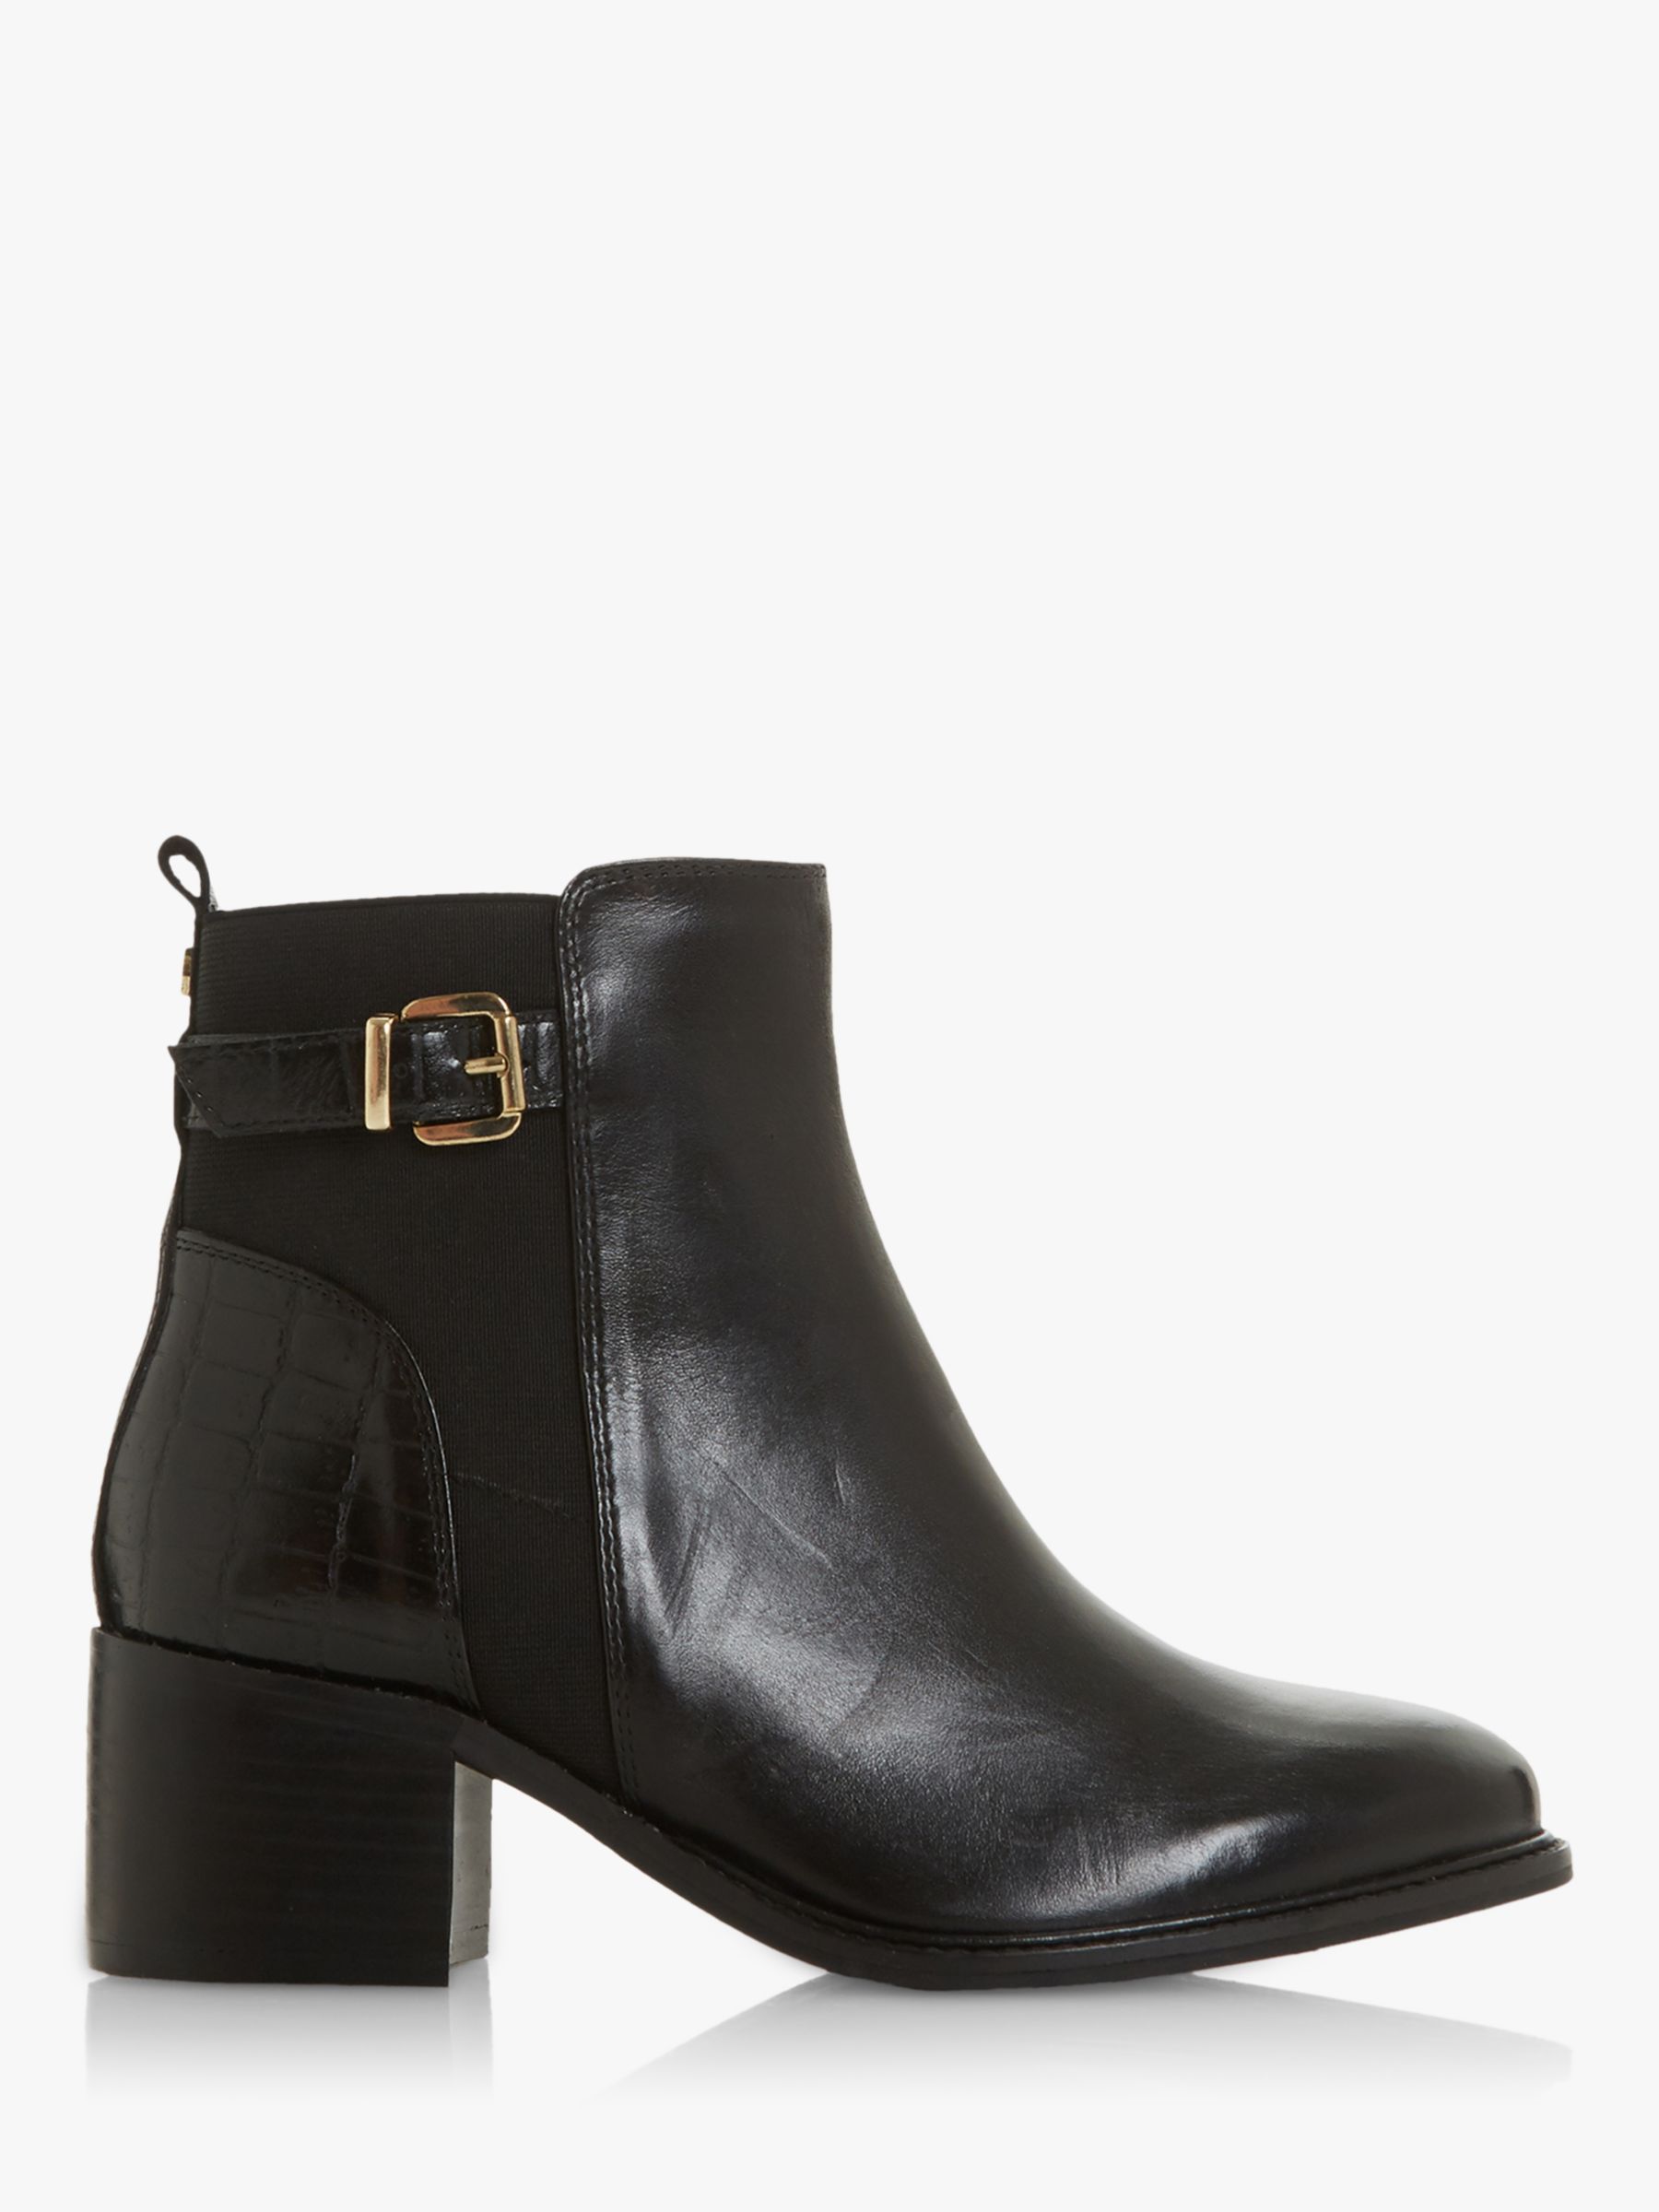 Dune black ankle boots